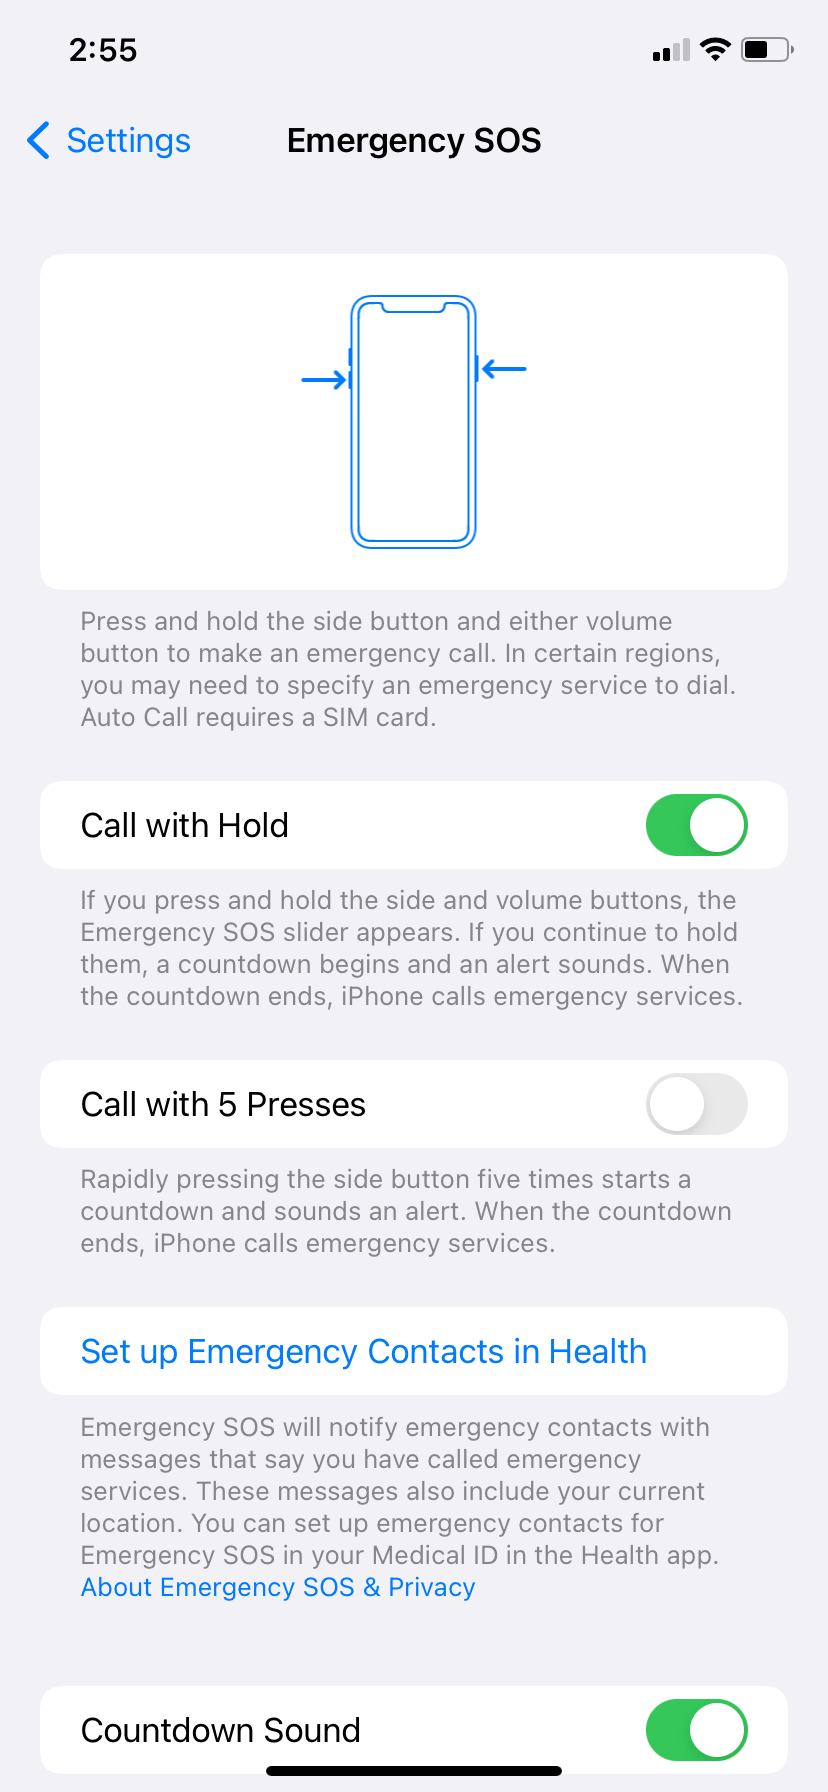 safety settings on your iphone: 5 presses call 911